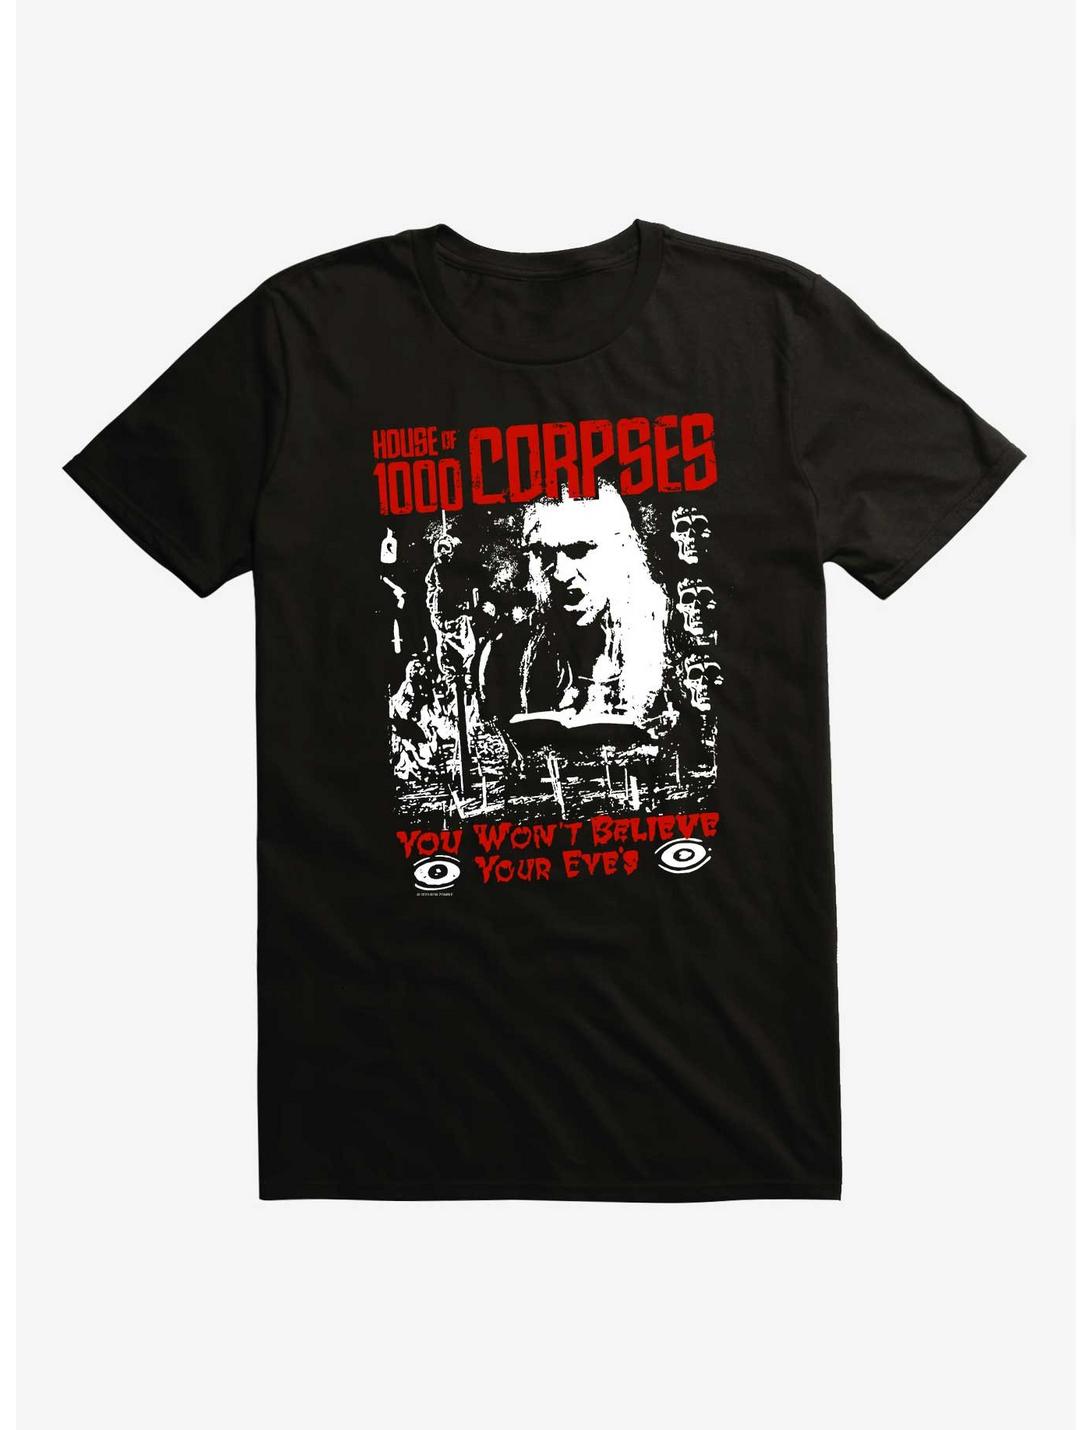 House Of 1000 Corpses You Won't Believe Your Eyes T-Shirt, BLACK, hi-res